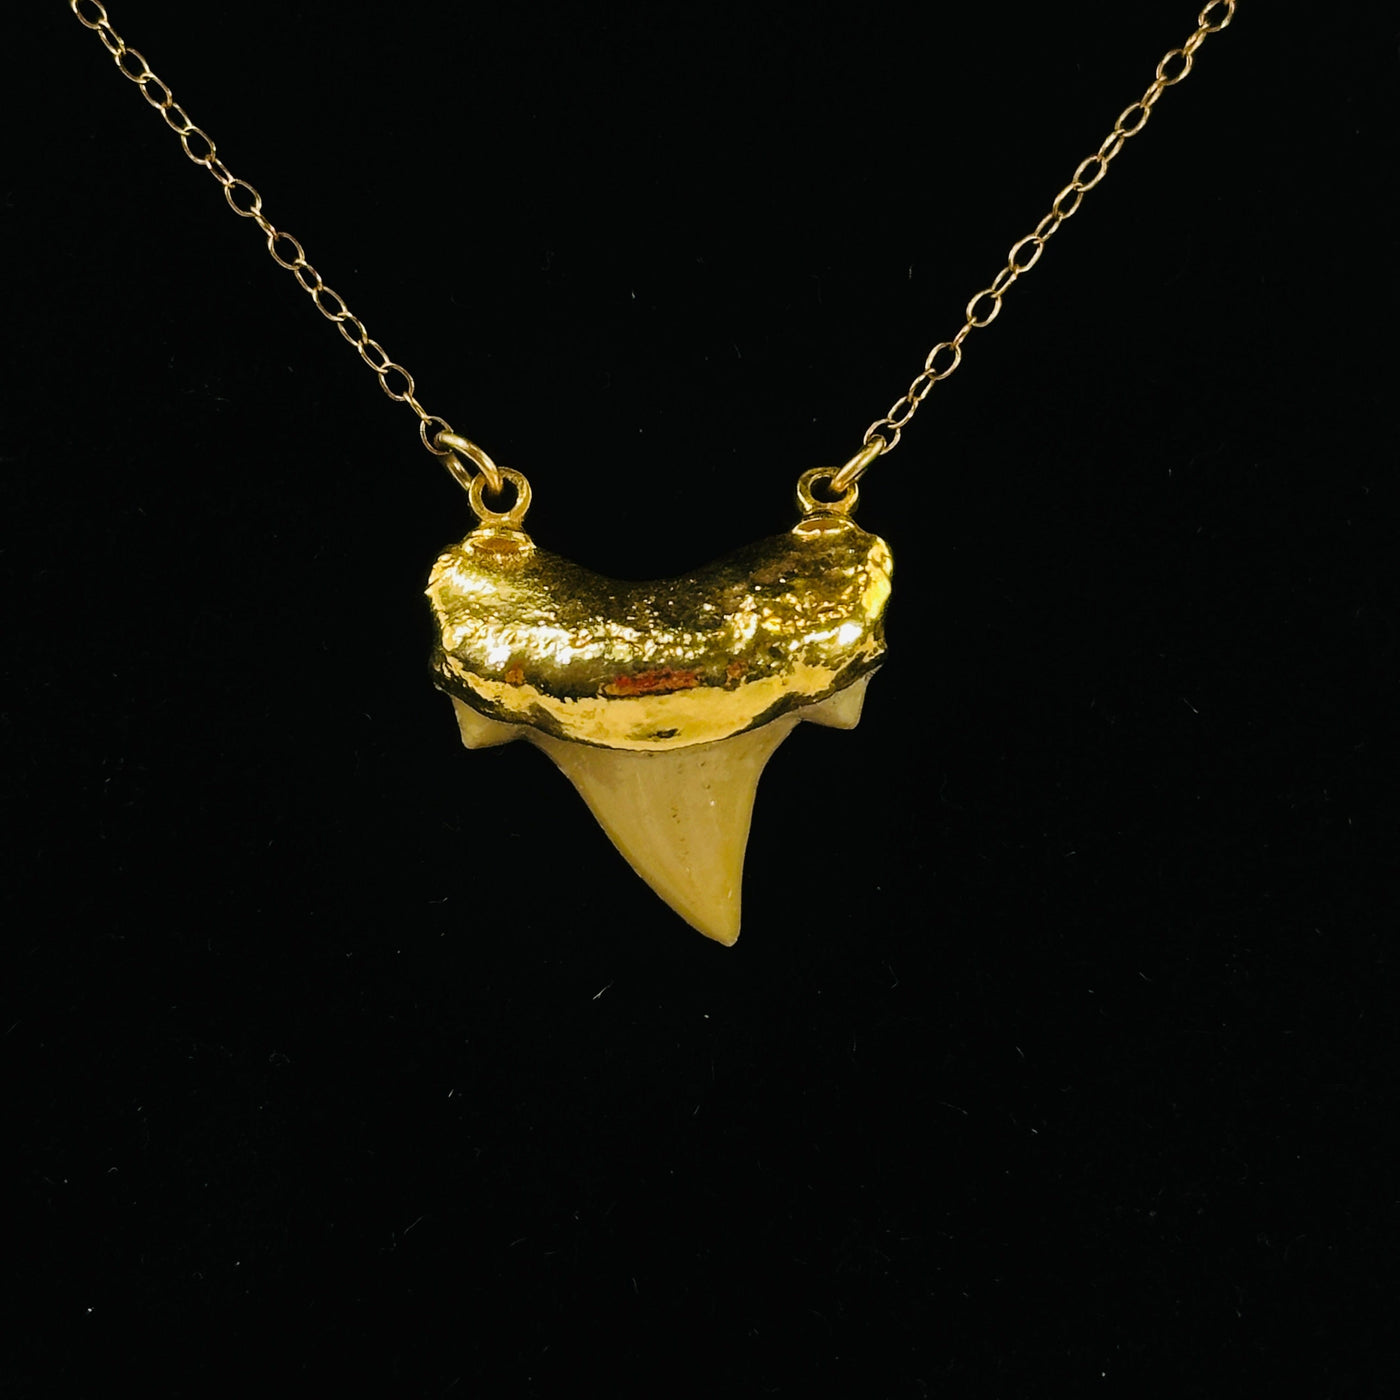 shark tooth necklace on black background